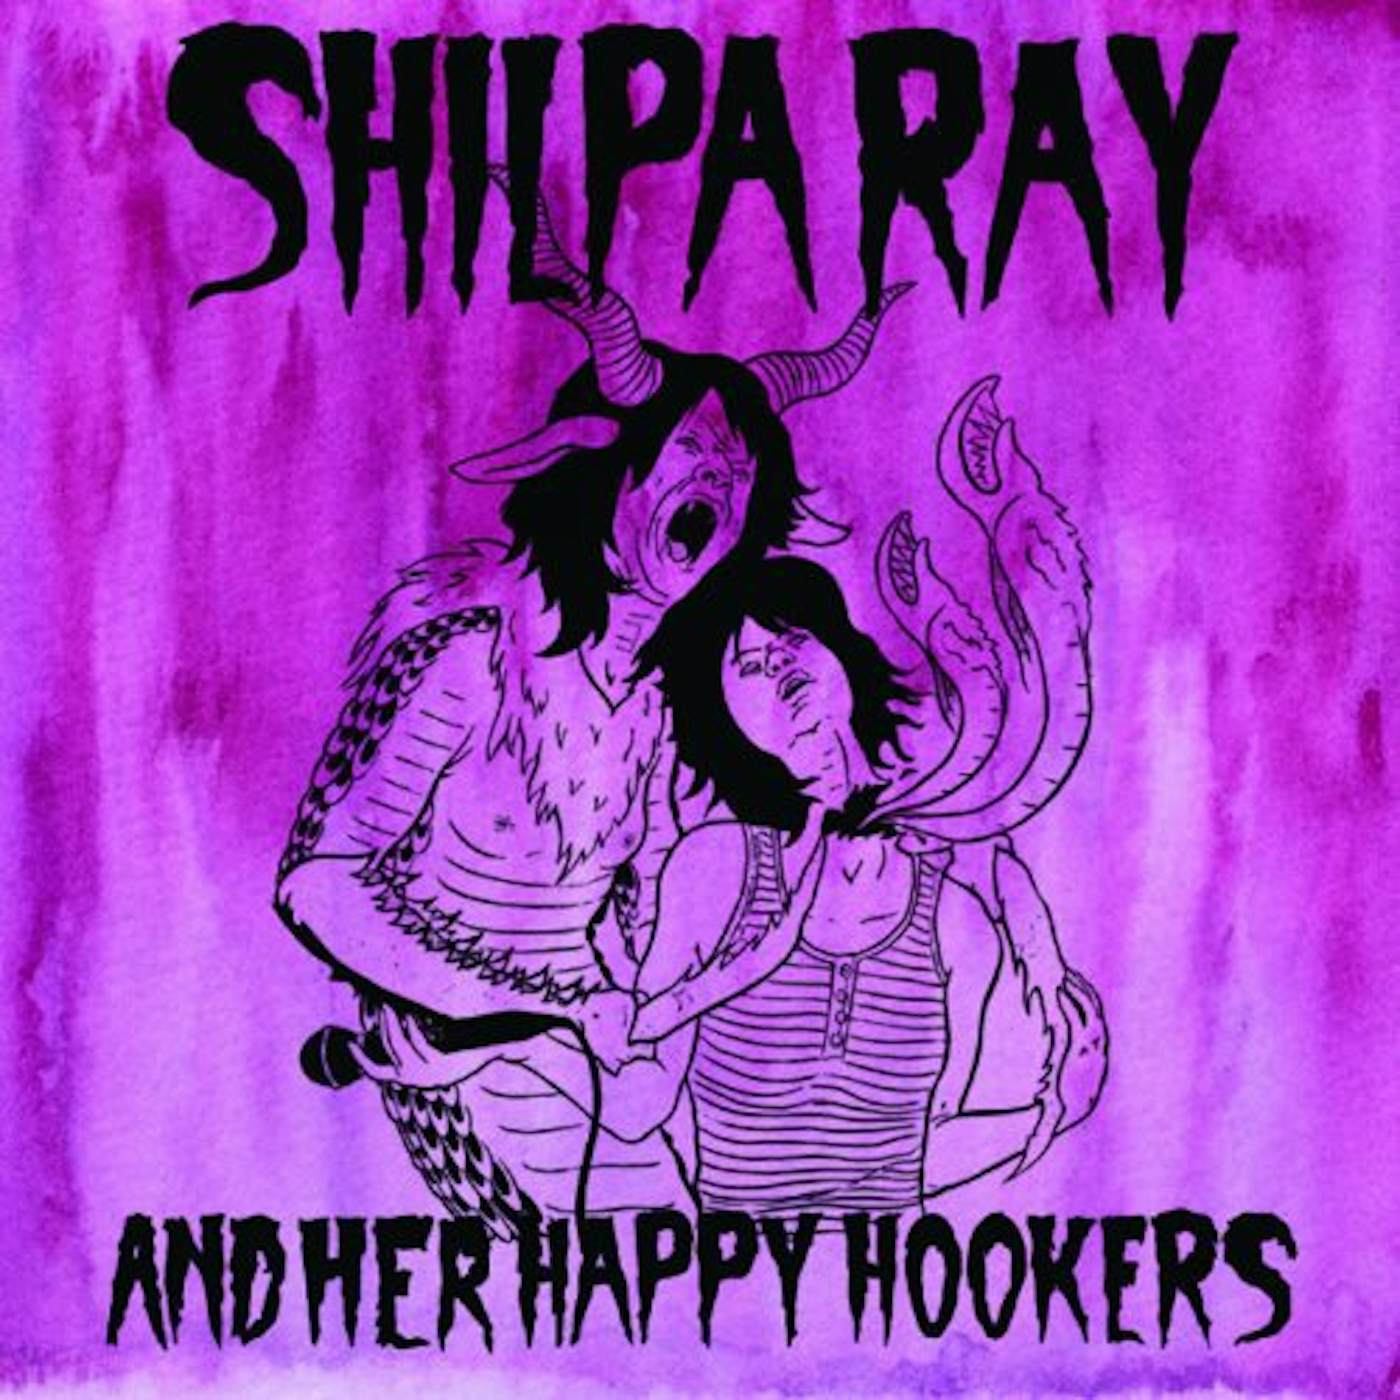 Shilpa Ray & Her Happy Hookers Teenage And Torture Vinyl Record